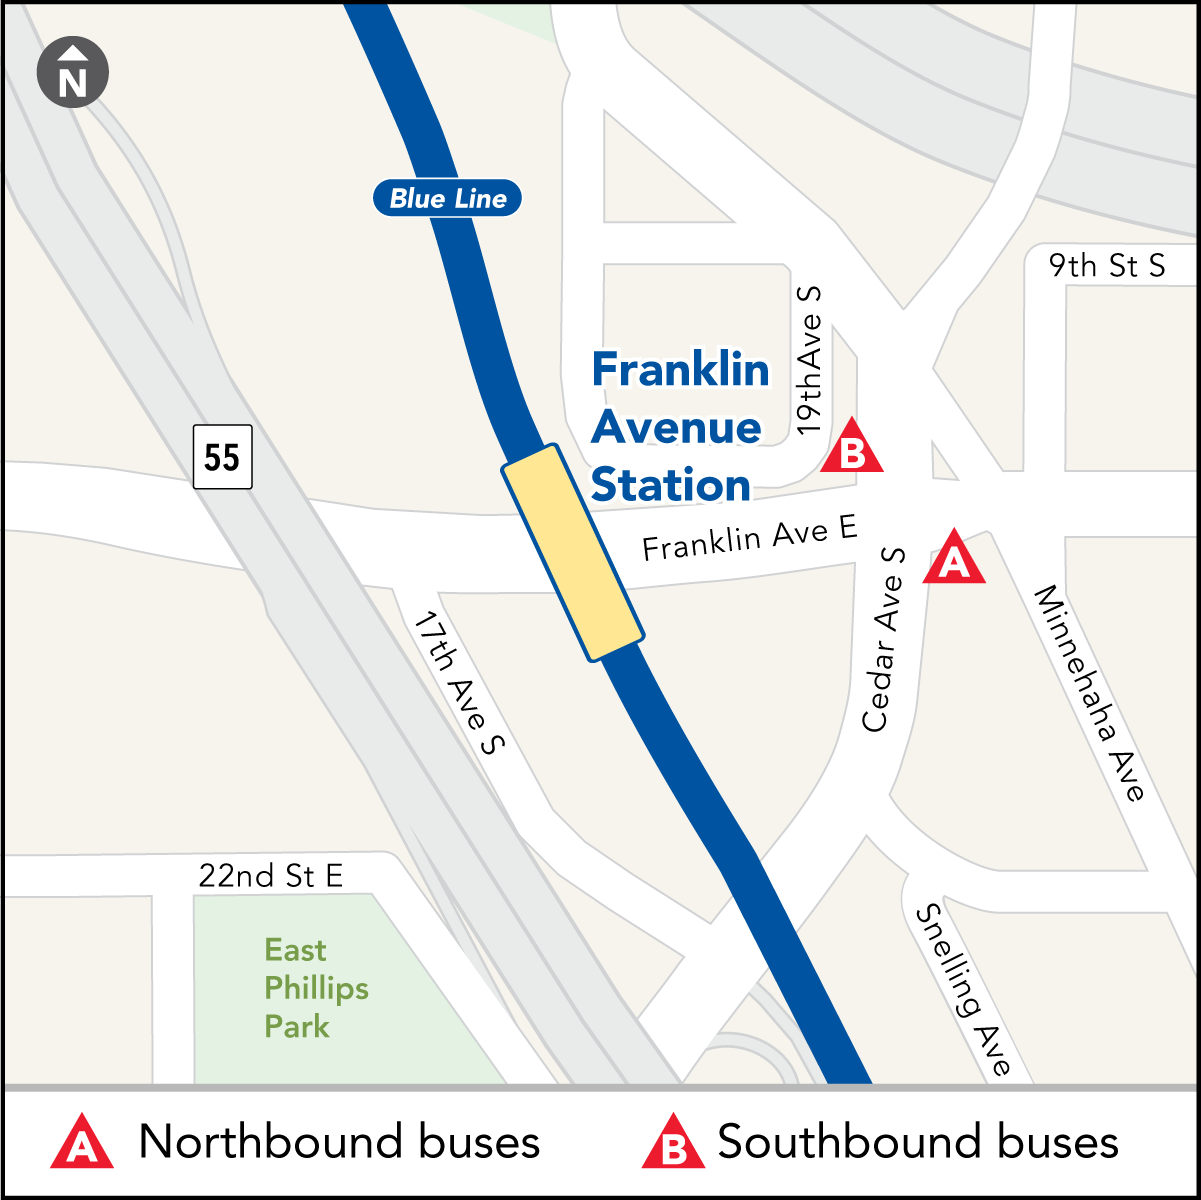 Southbound buses stop on southbound Cedar Ave at Franklin Ave. Northbound buses stop on northbound Cedar Ave at Franklin Ave.